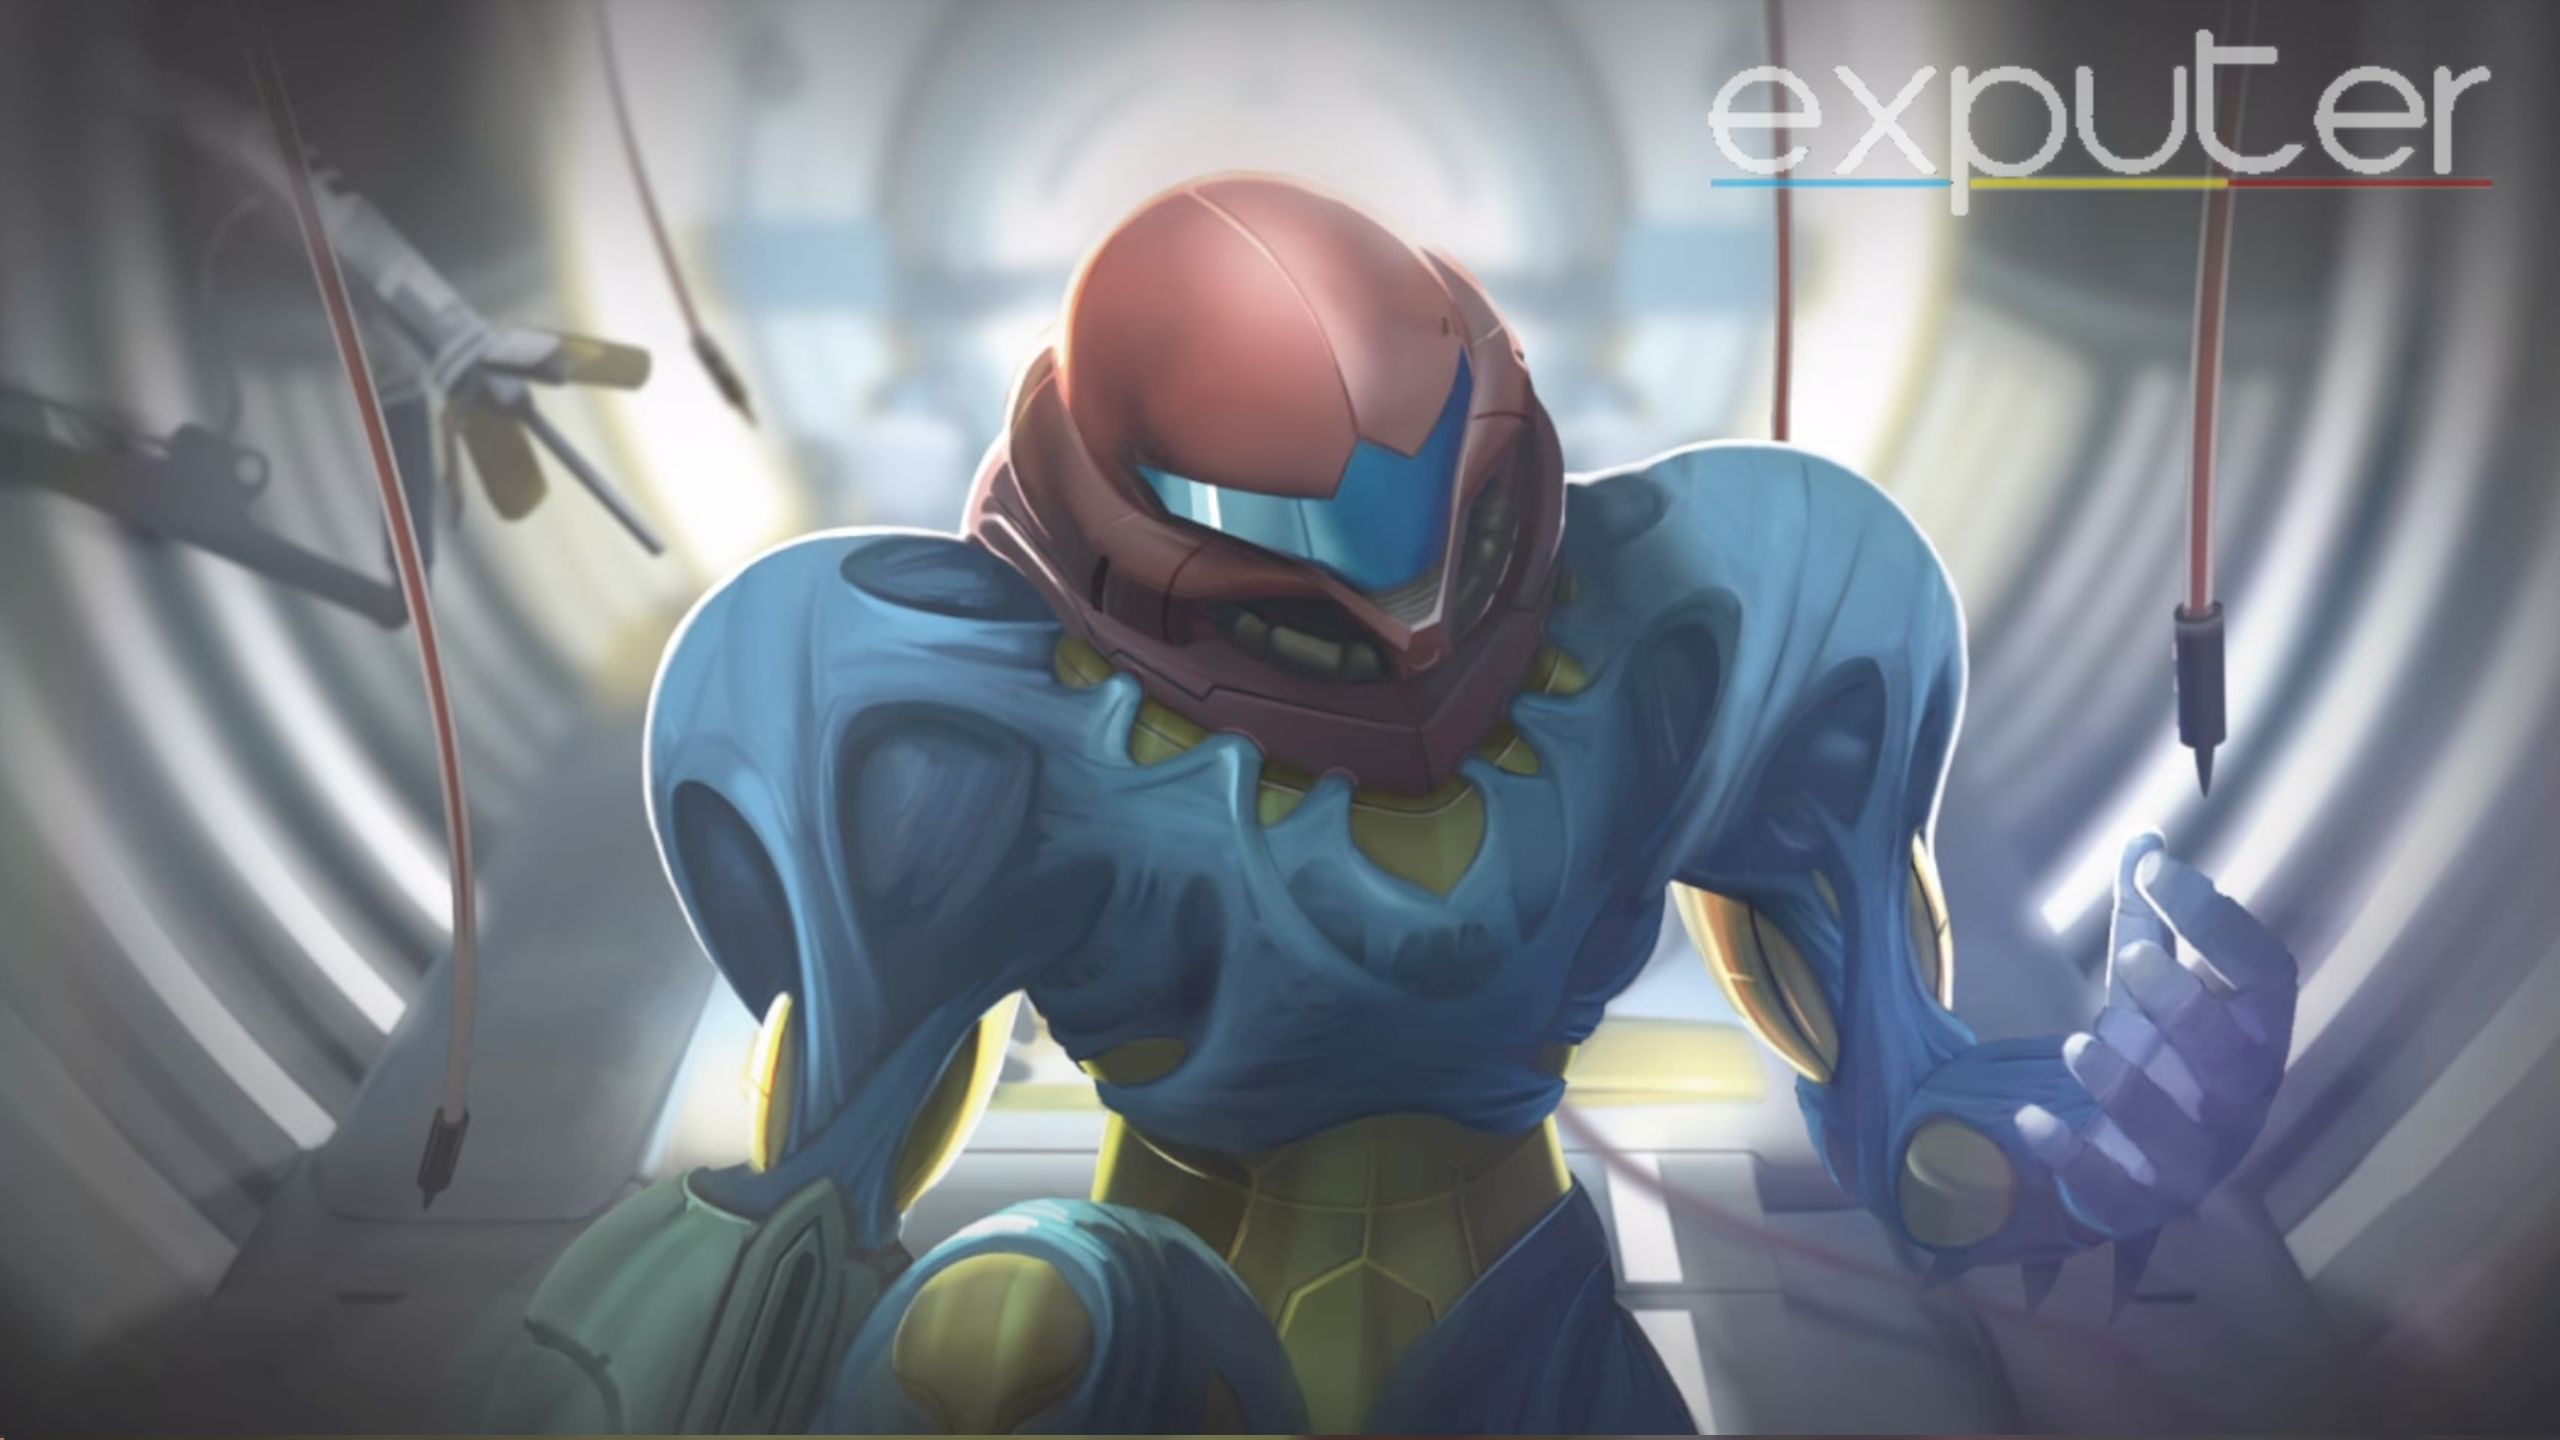 Samus, after receiving the Metroid vaccine during the events of Metroid Fusion. (Image taken by eXputer)